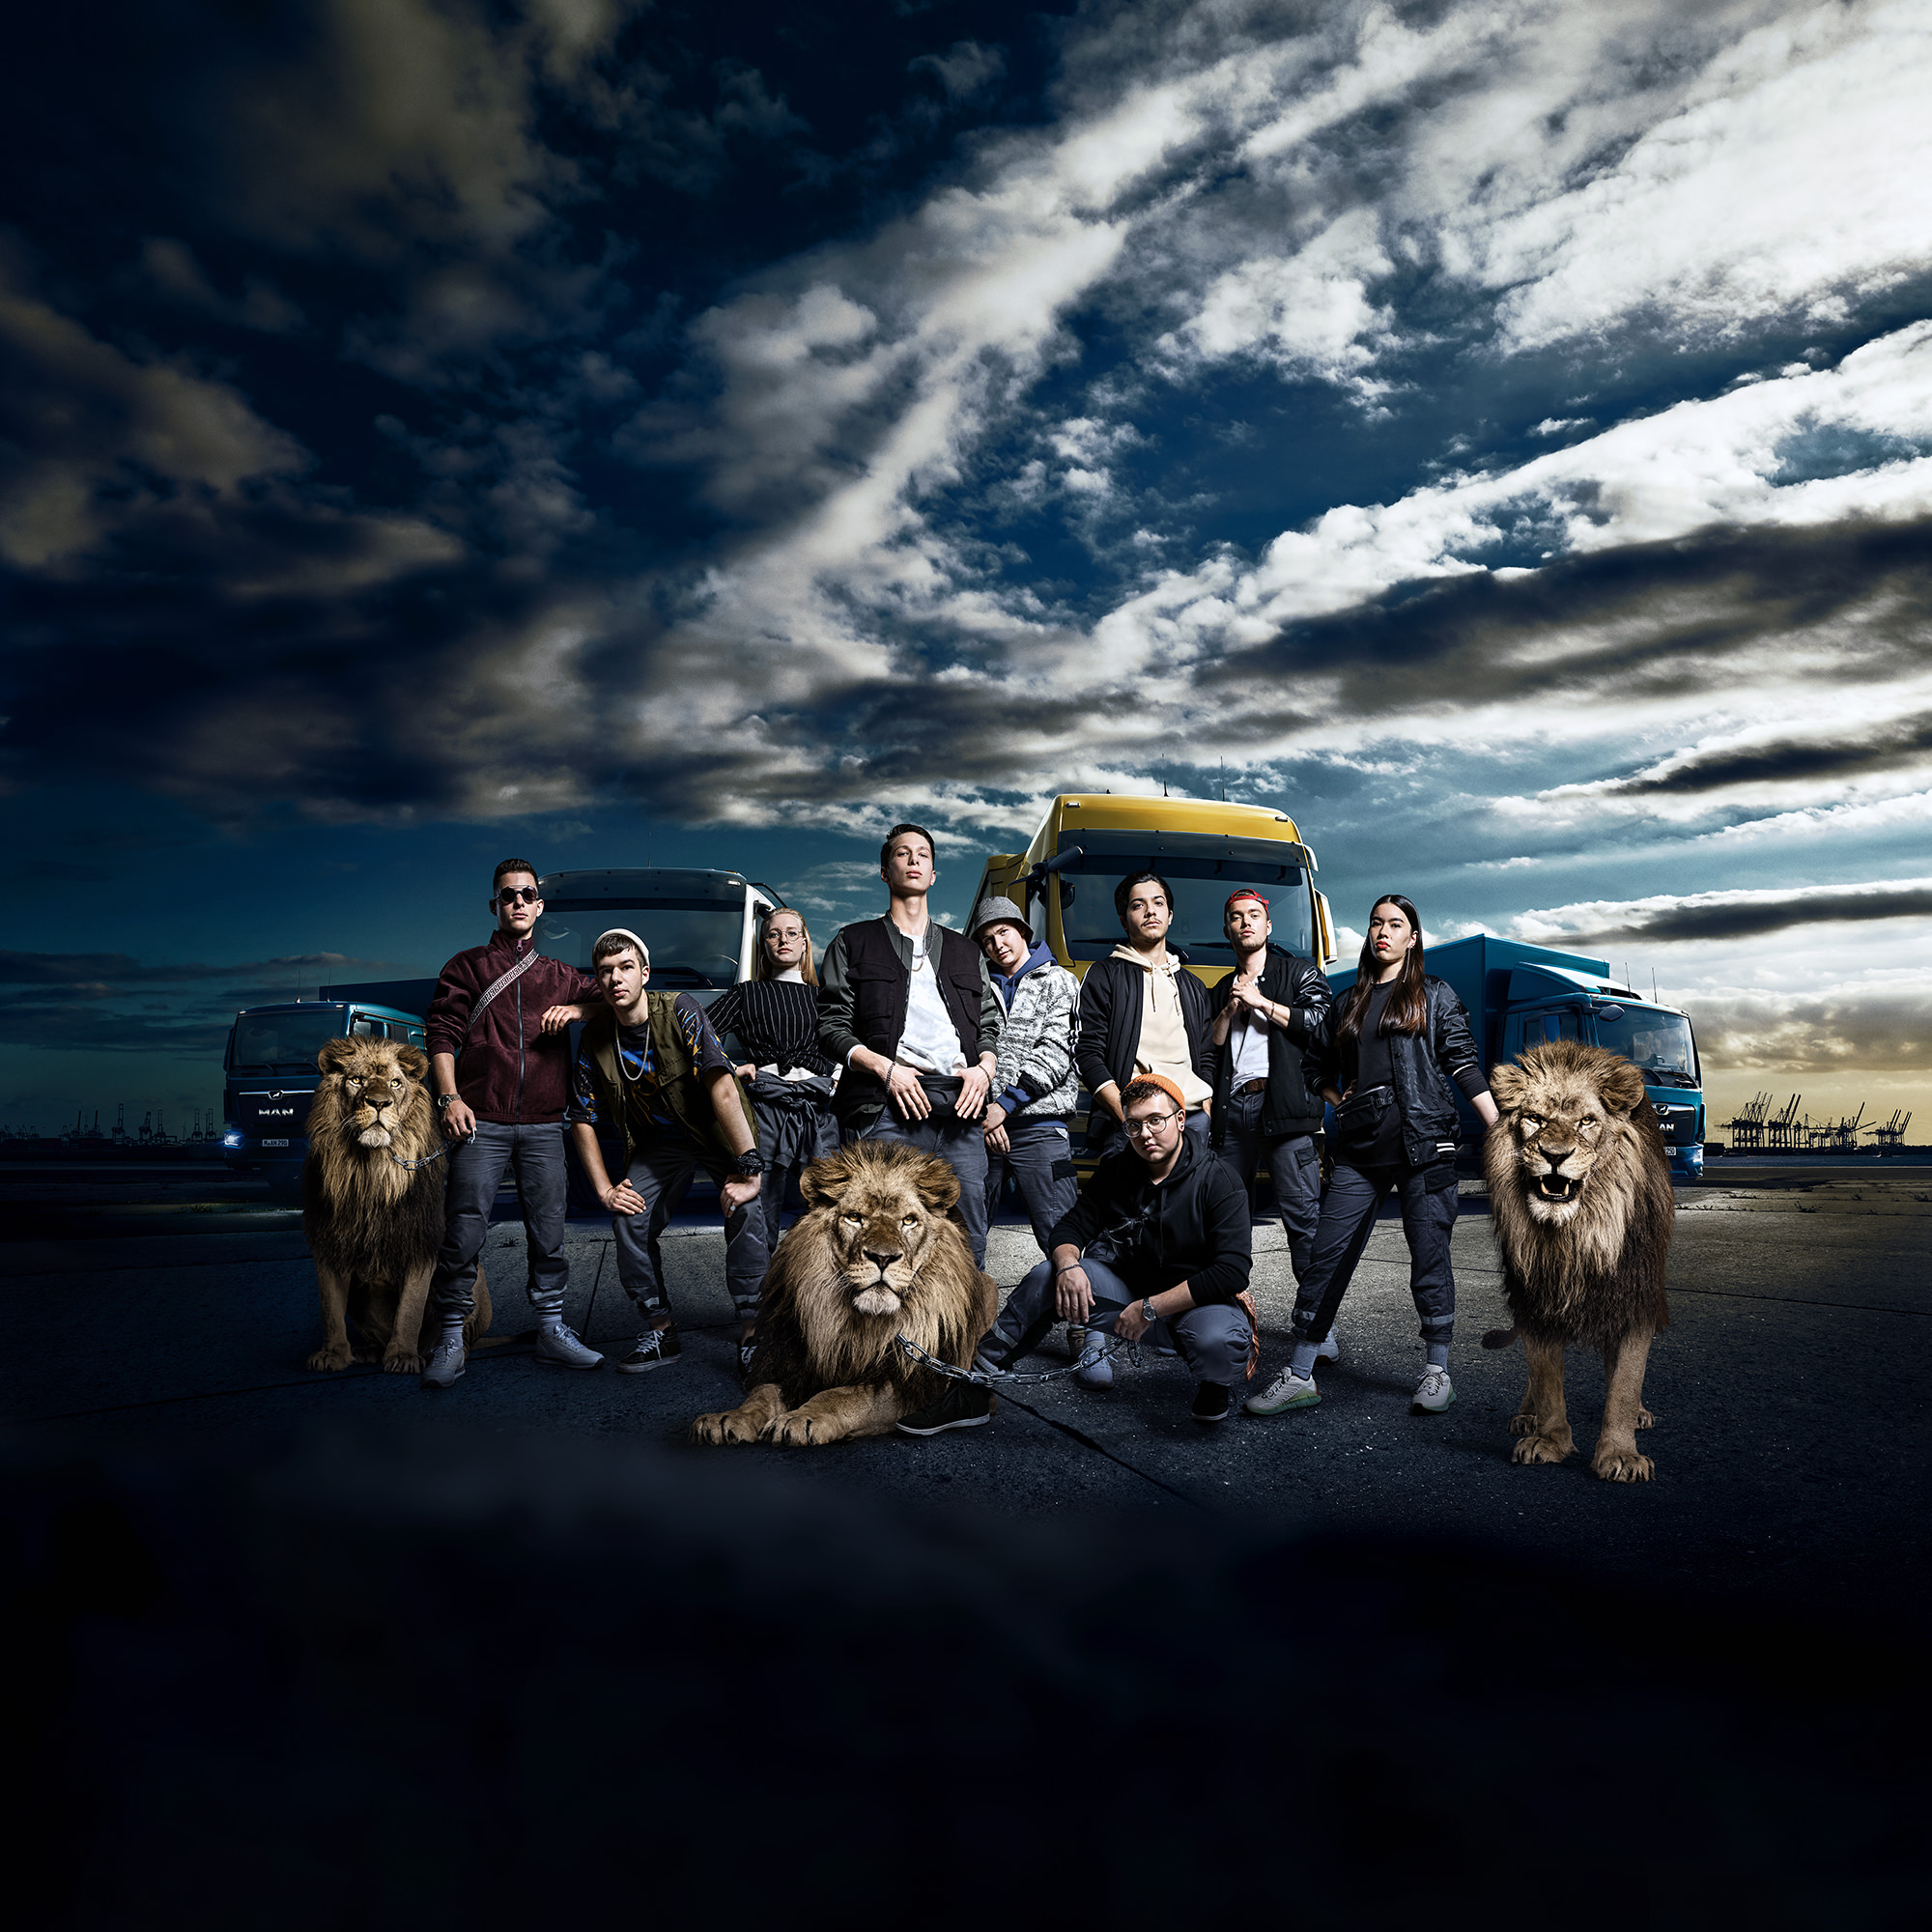 Assembled group portrait with trucks and lions